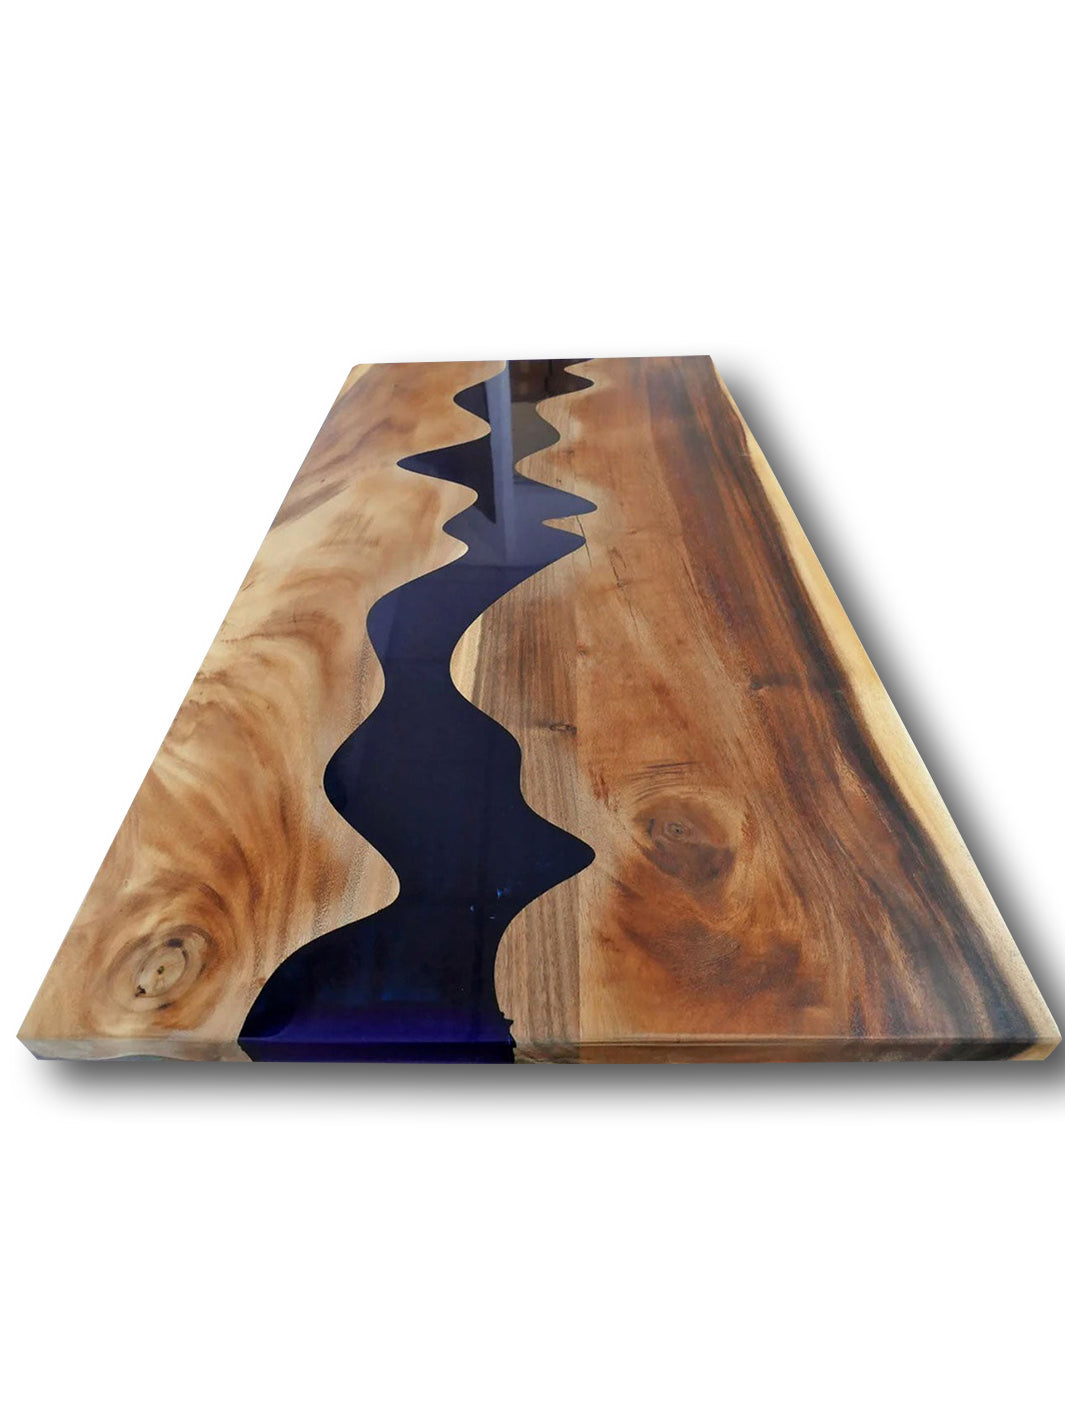 Handcrafted River Beach Epoxy Resin Wooden Coffee Table | 4ft x 2ft Made 4 Decor Tables MDR0007